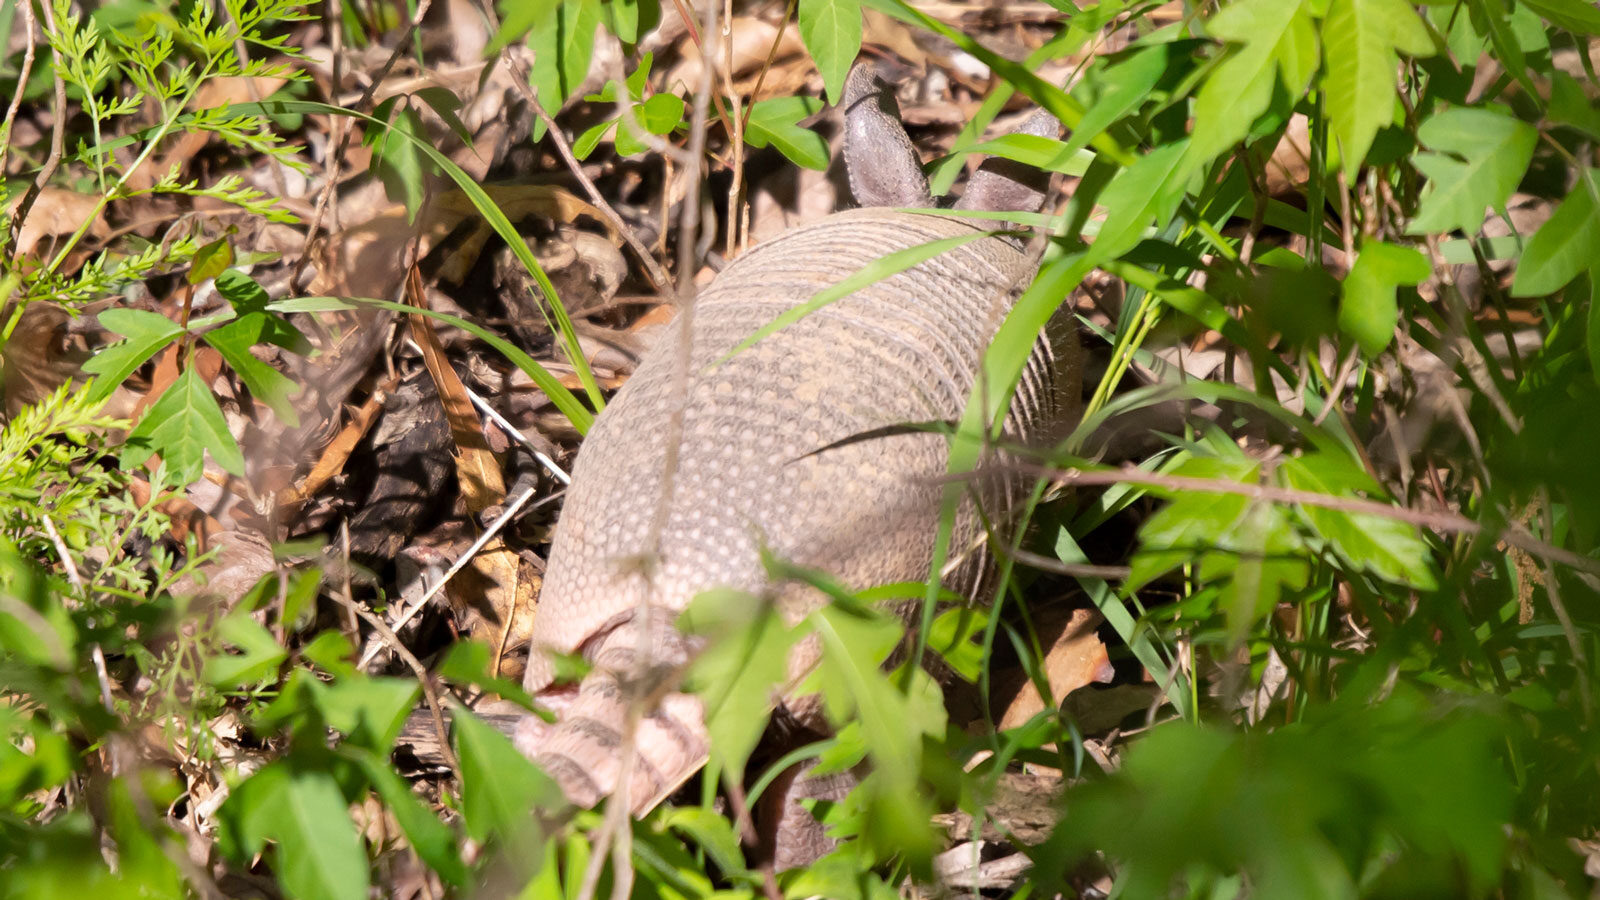 Young nine-banded armadillo foraging in overgrowth